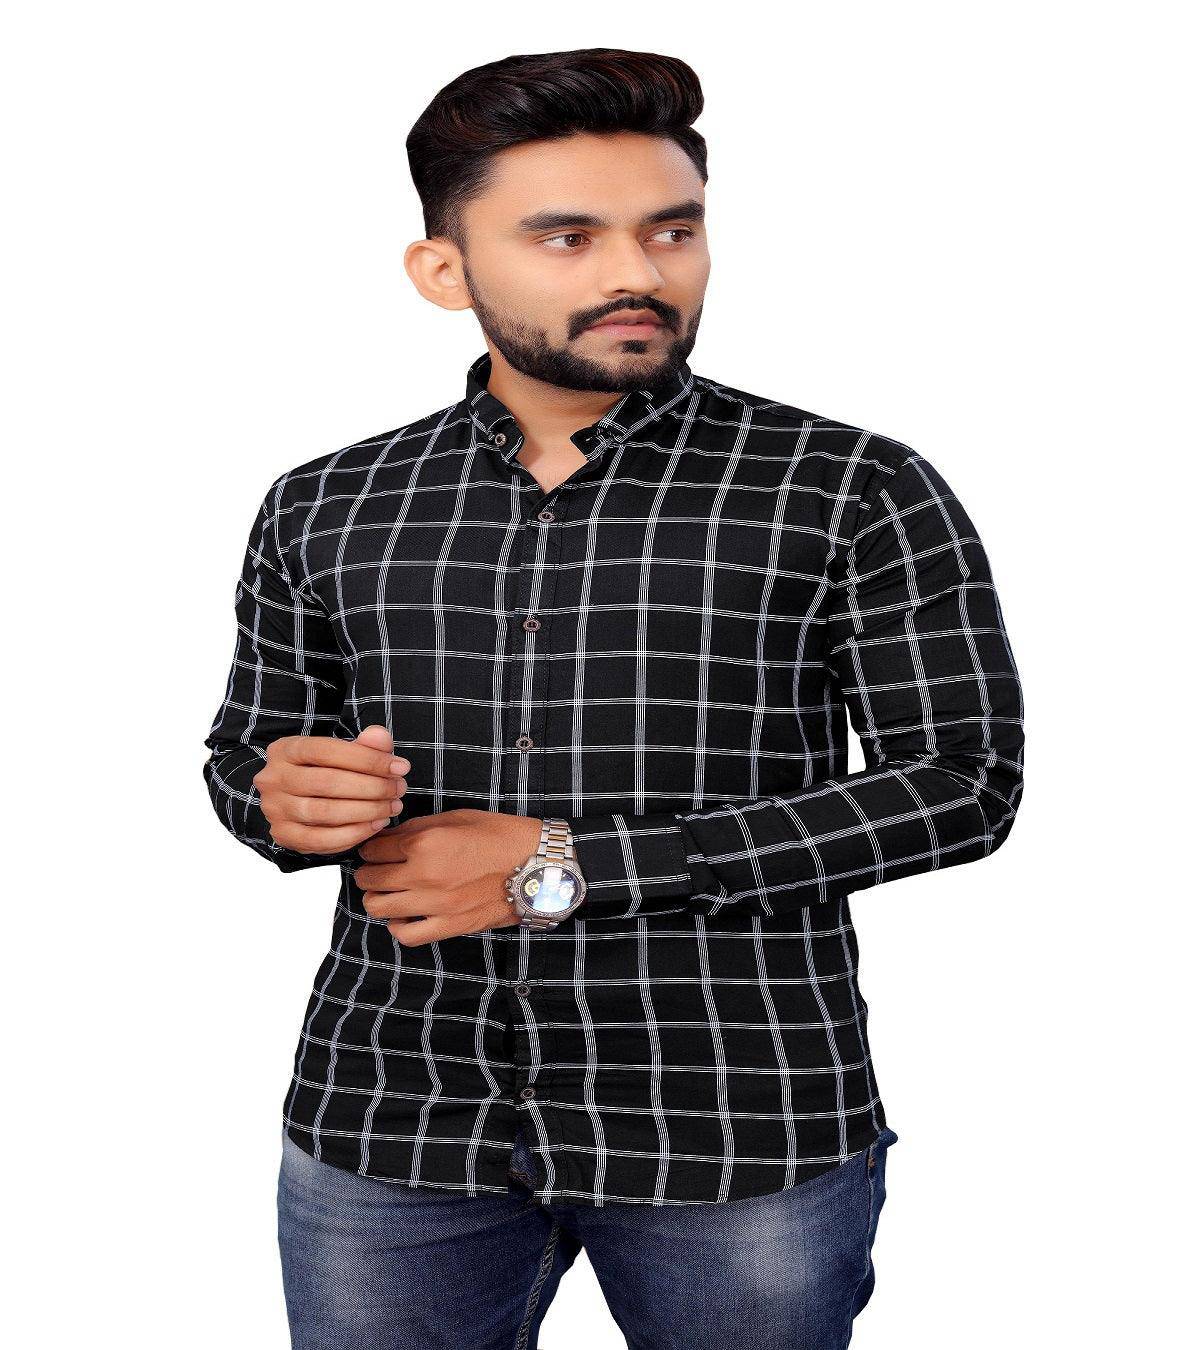 UD FABRIC Men Full Sleeve Cotton Casual Check Shirts - Maroon - UD FABRIC - Your Style our Design